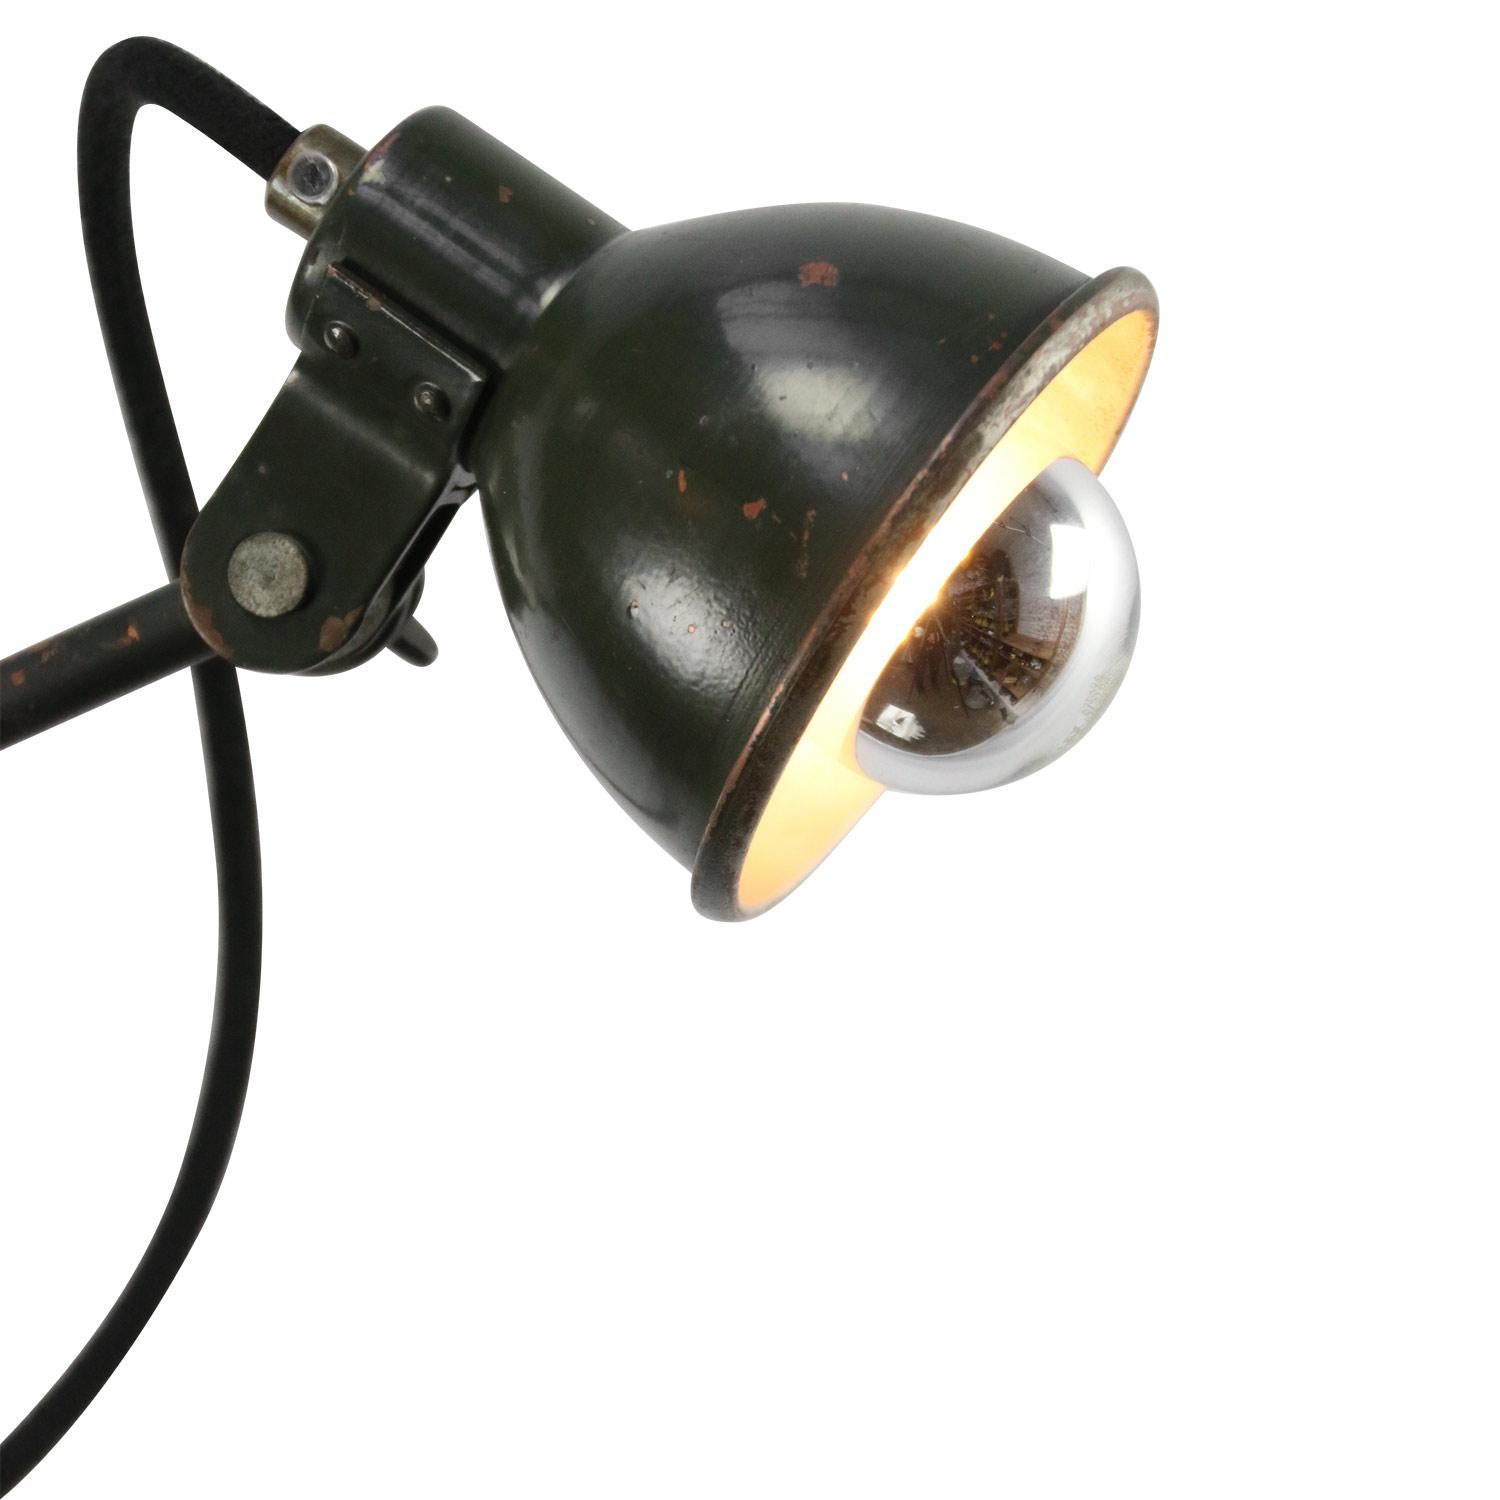 Green painted copper wall lights with switch 
Adjustable in height
Measures: Diameter shade 10 cm / 3.94 inch.

E14

E14 bulb holder. Priced per individual item. All lamps have been made suitable by international standards for incandescent